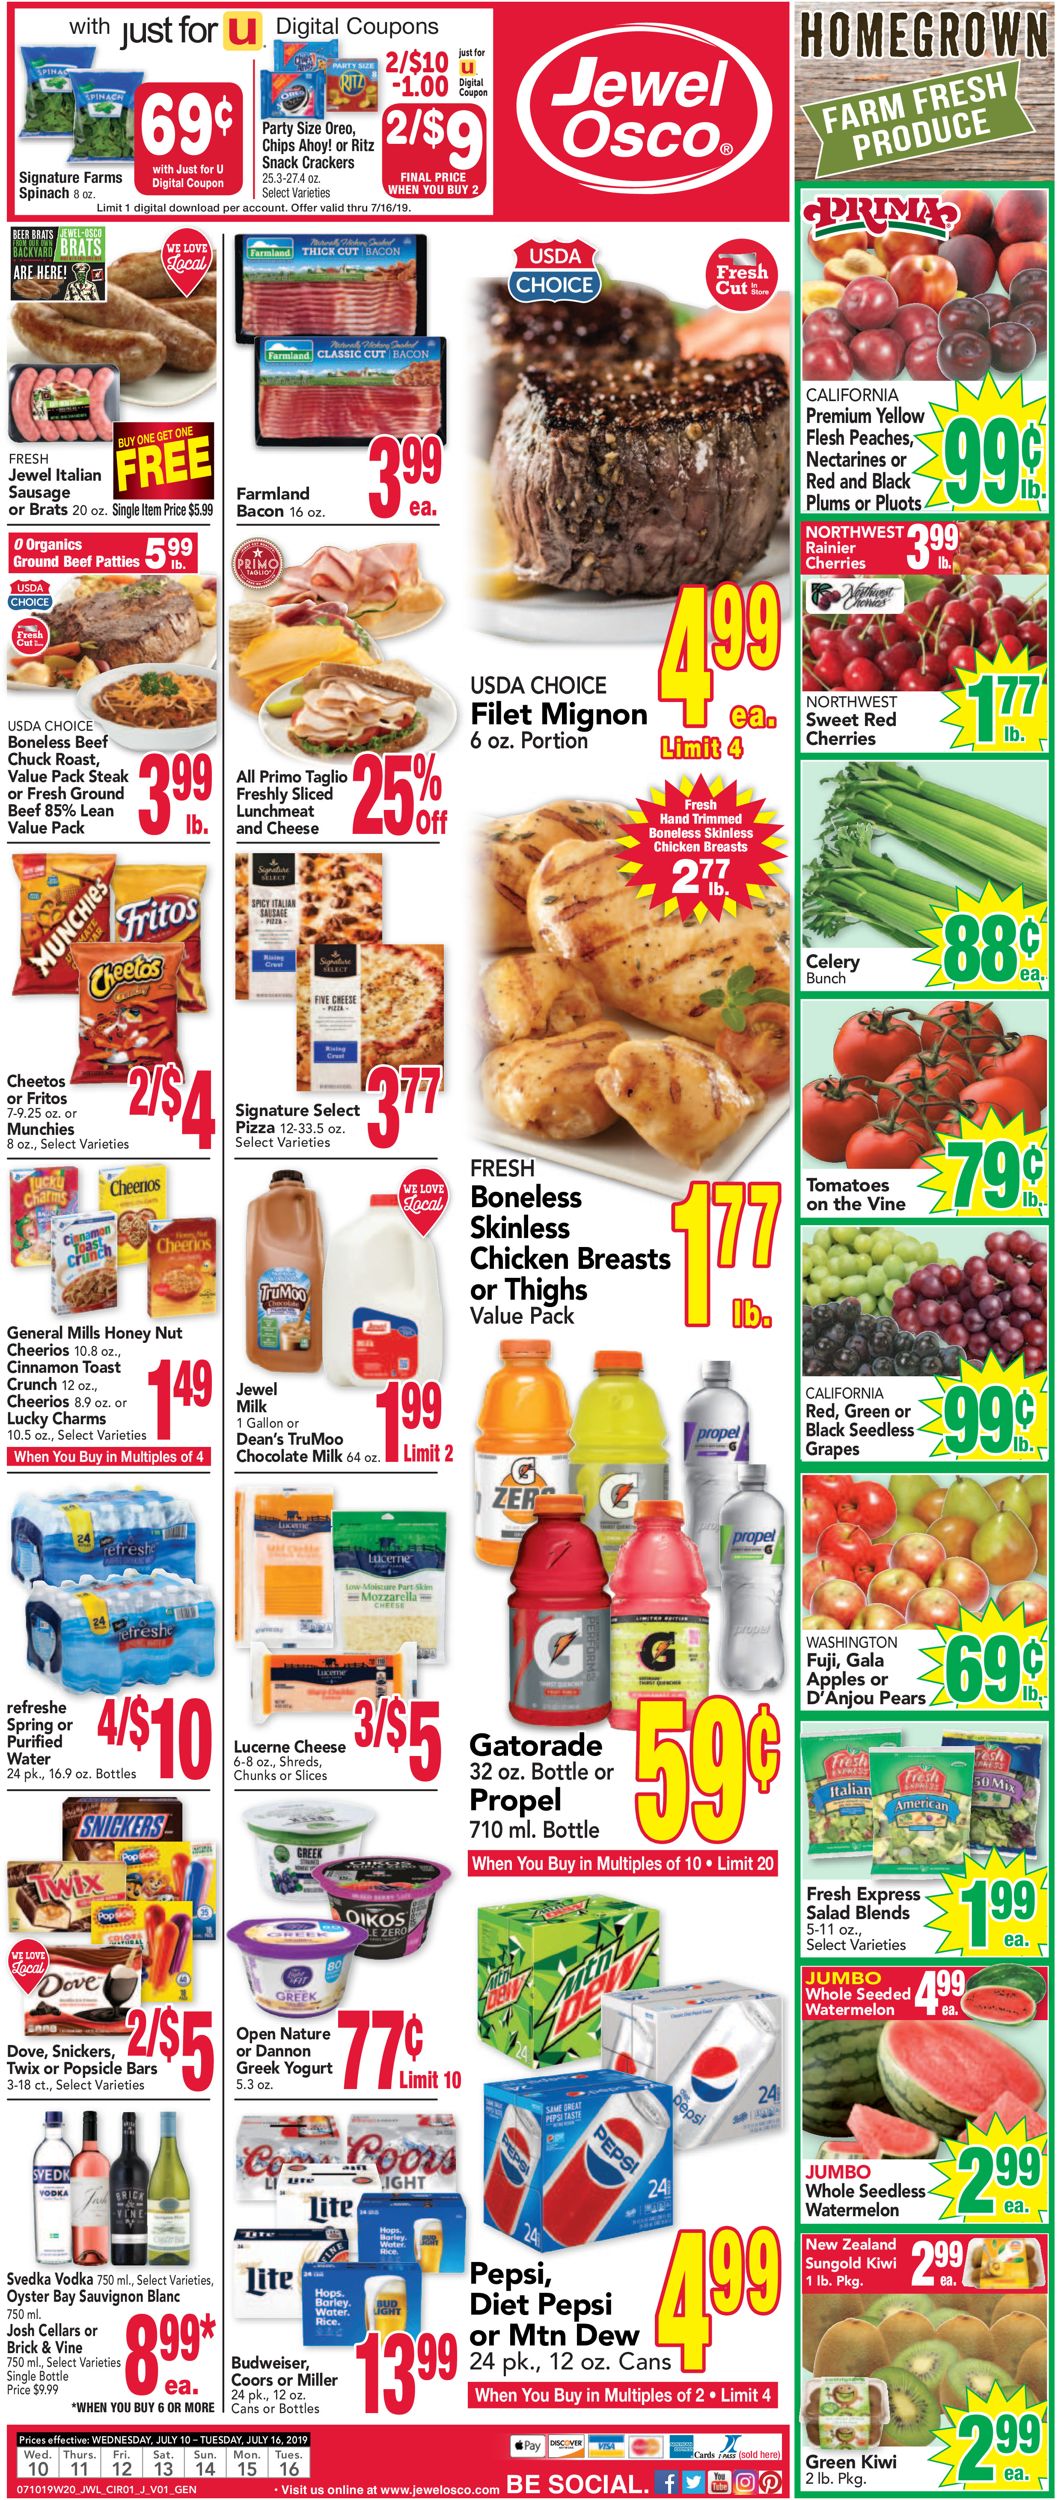 Jewel Osco Current weekly ad 07/10 - 07/16/2019 [3] - frequent-ads.com